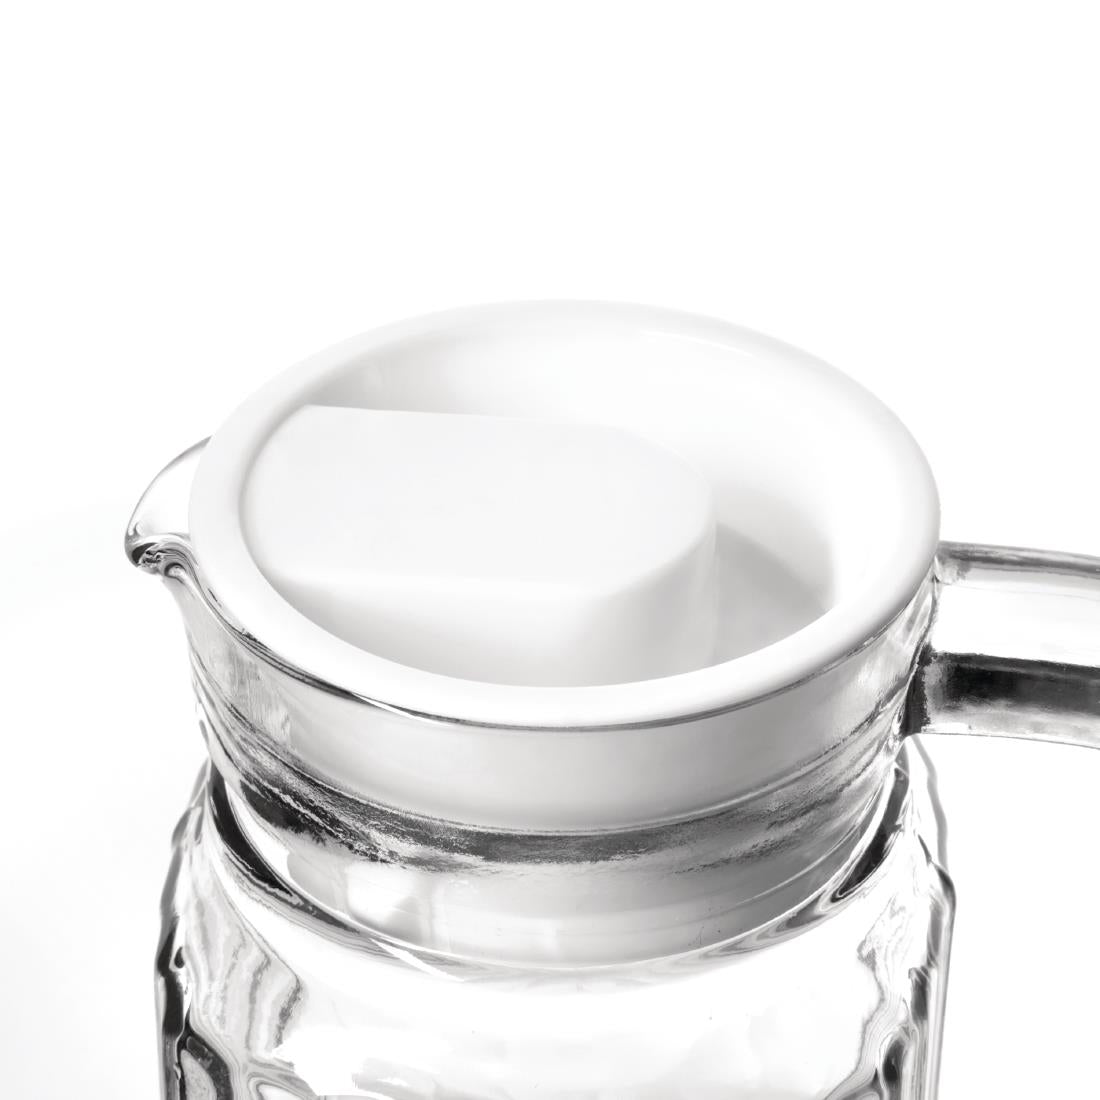 GF922 Olympia Ribbed Glass Jugs 1Ltr (Pack of 6) JD Catering Equipment Solutions Ltd